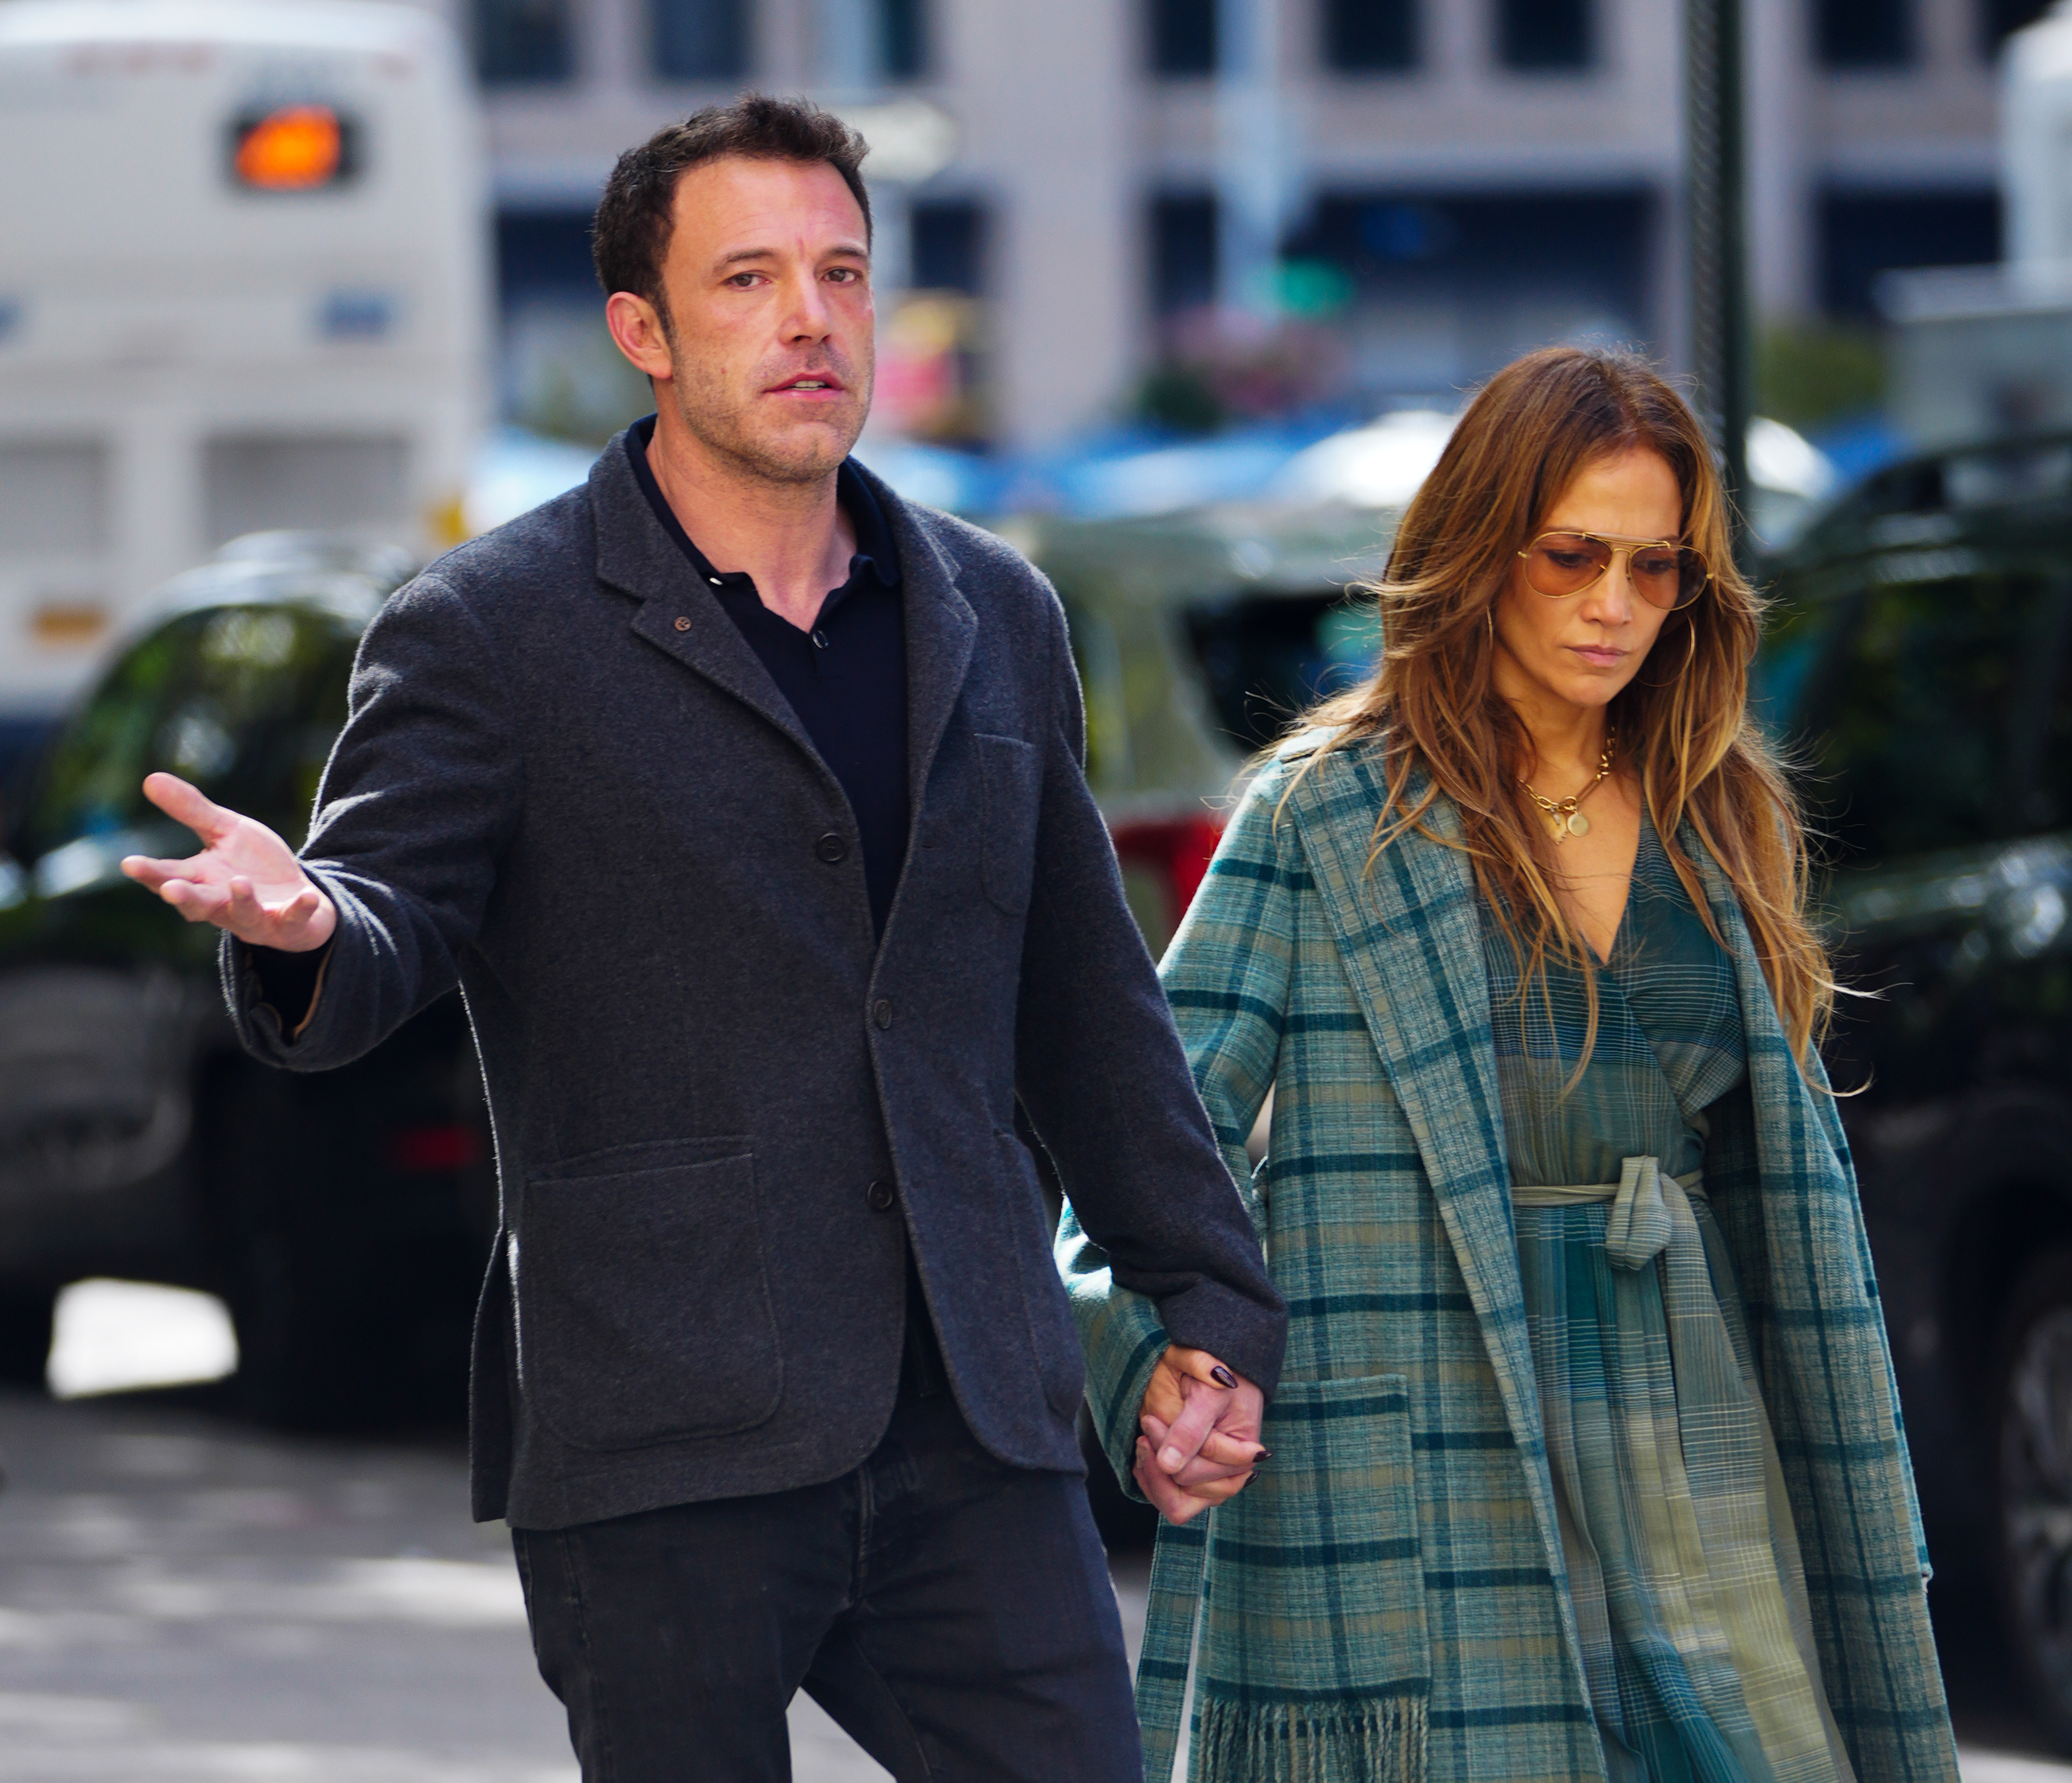 Ben Affleck and Jennifer Lopez spotted out in New York City on September 26, 2021 | Source: Getty Images